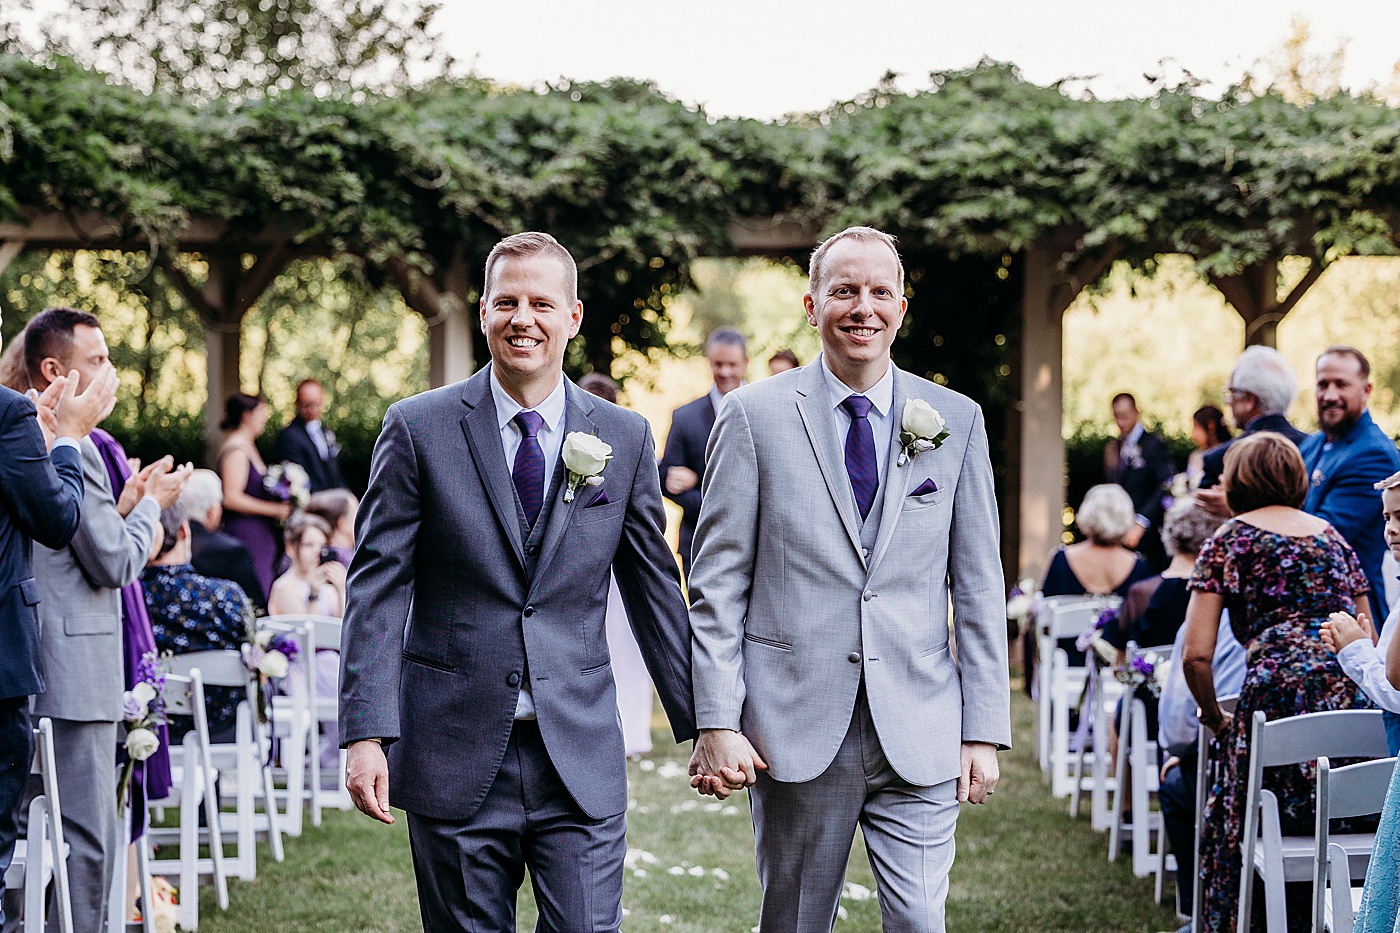 Newlyweds walking down the aisle after getting married at Sanders Estate | Megan Montalvo Photography